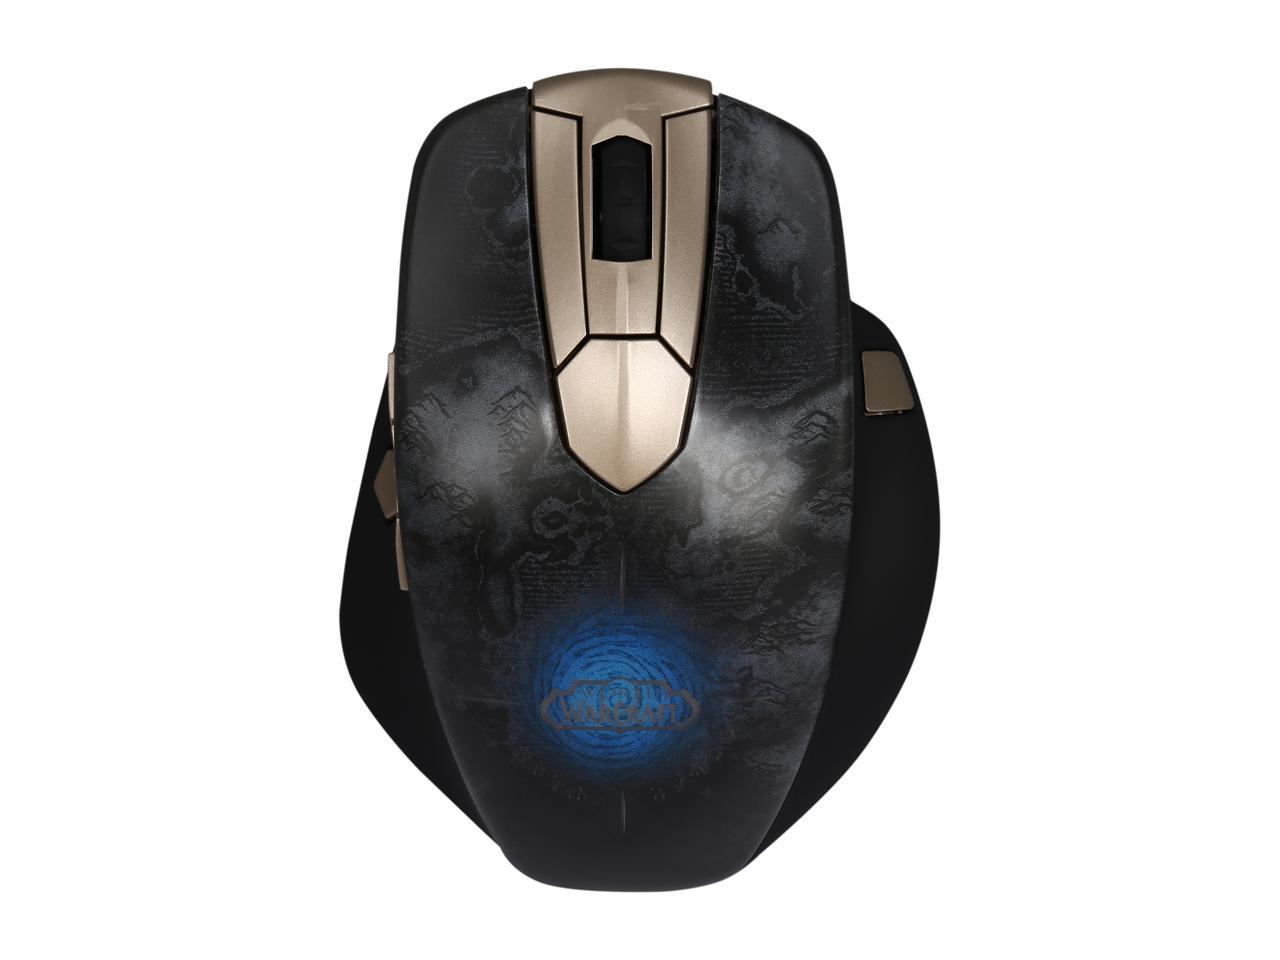 steelseries wow mouse not working buttons